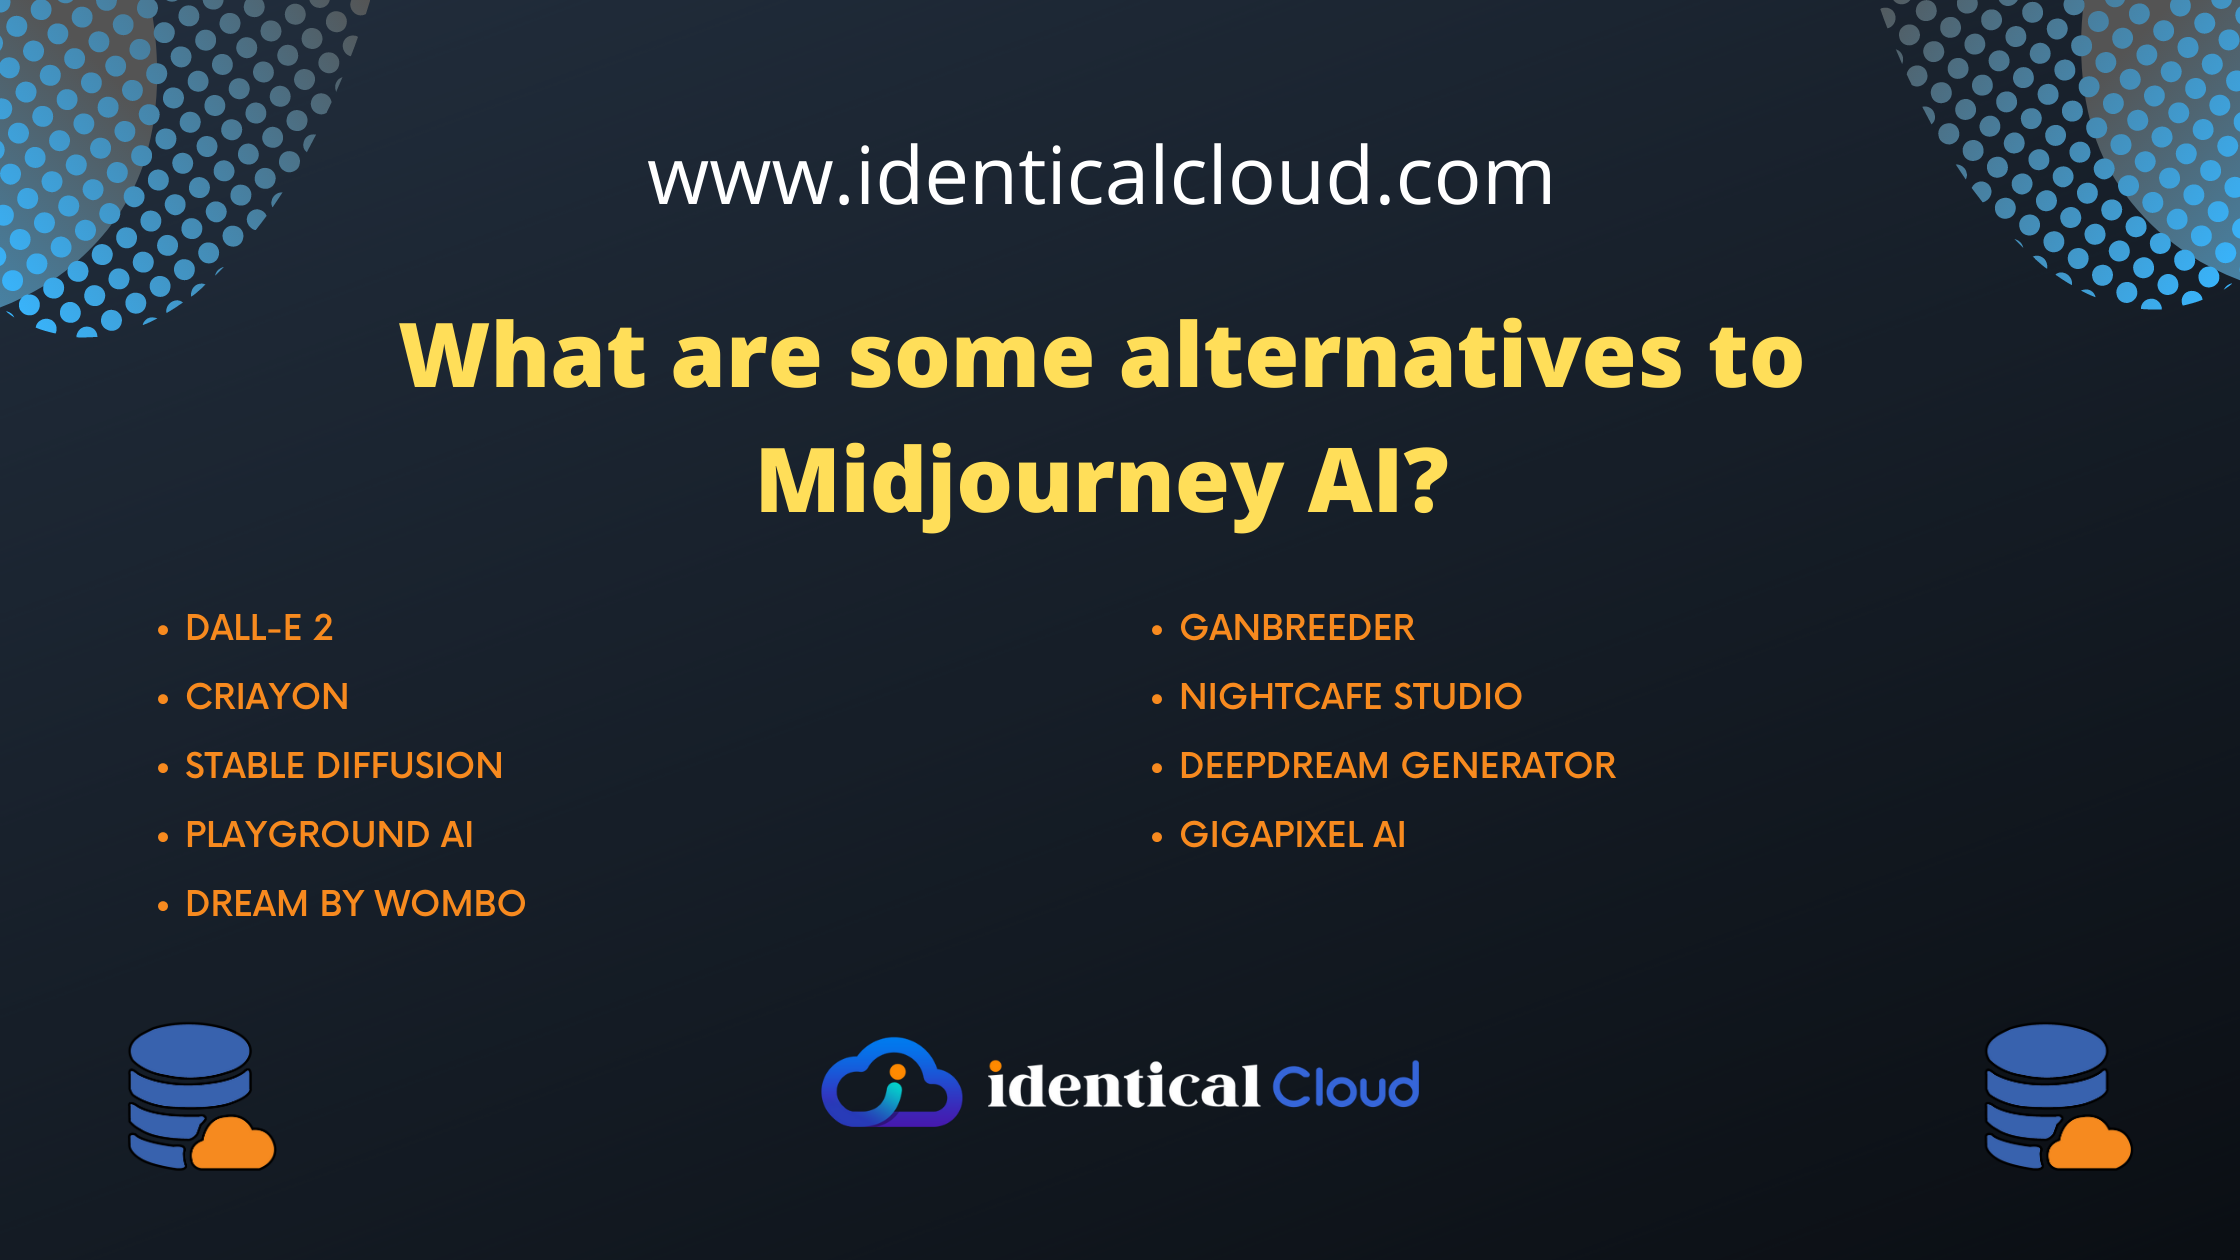 What are some alternatives to Midjourney AI? - identicalcloud.com